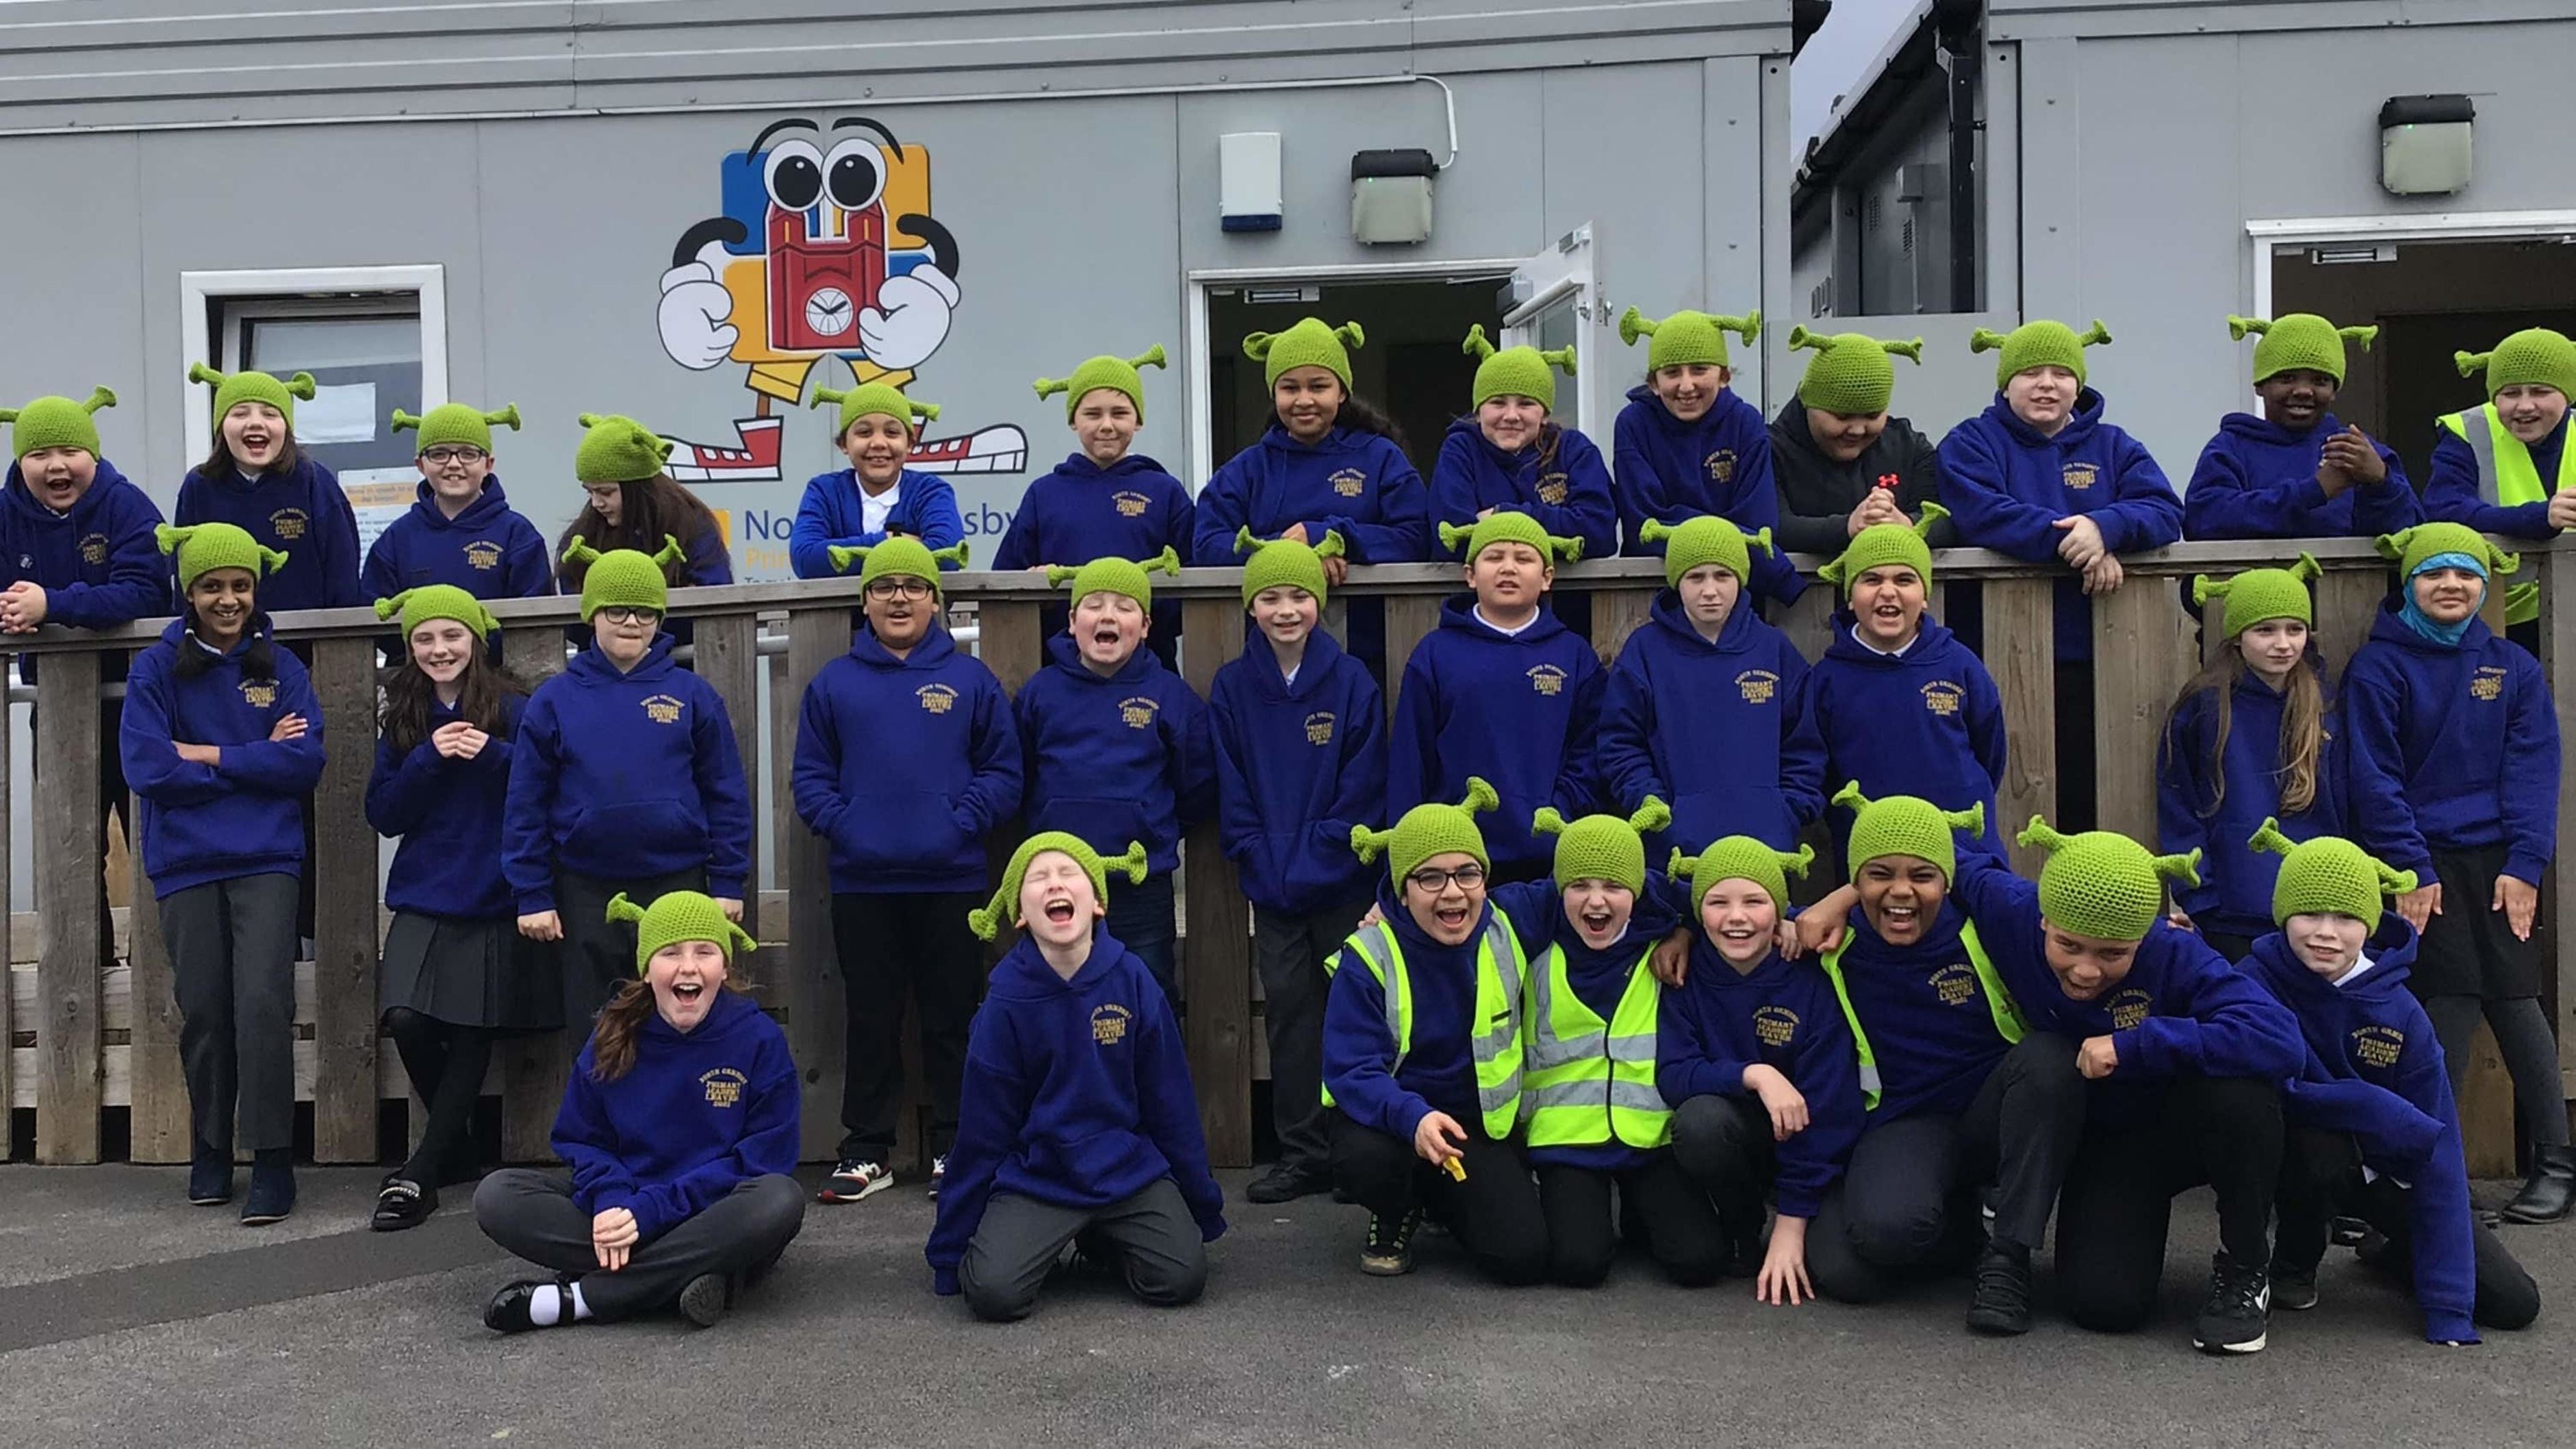 Chris Dowie made the hats for year six students at North Ormesby Primary Academy in Middlesbrough, who were returning after the Covid-19 lockdown.